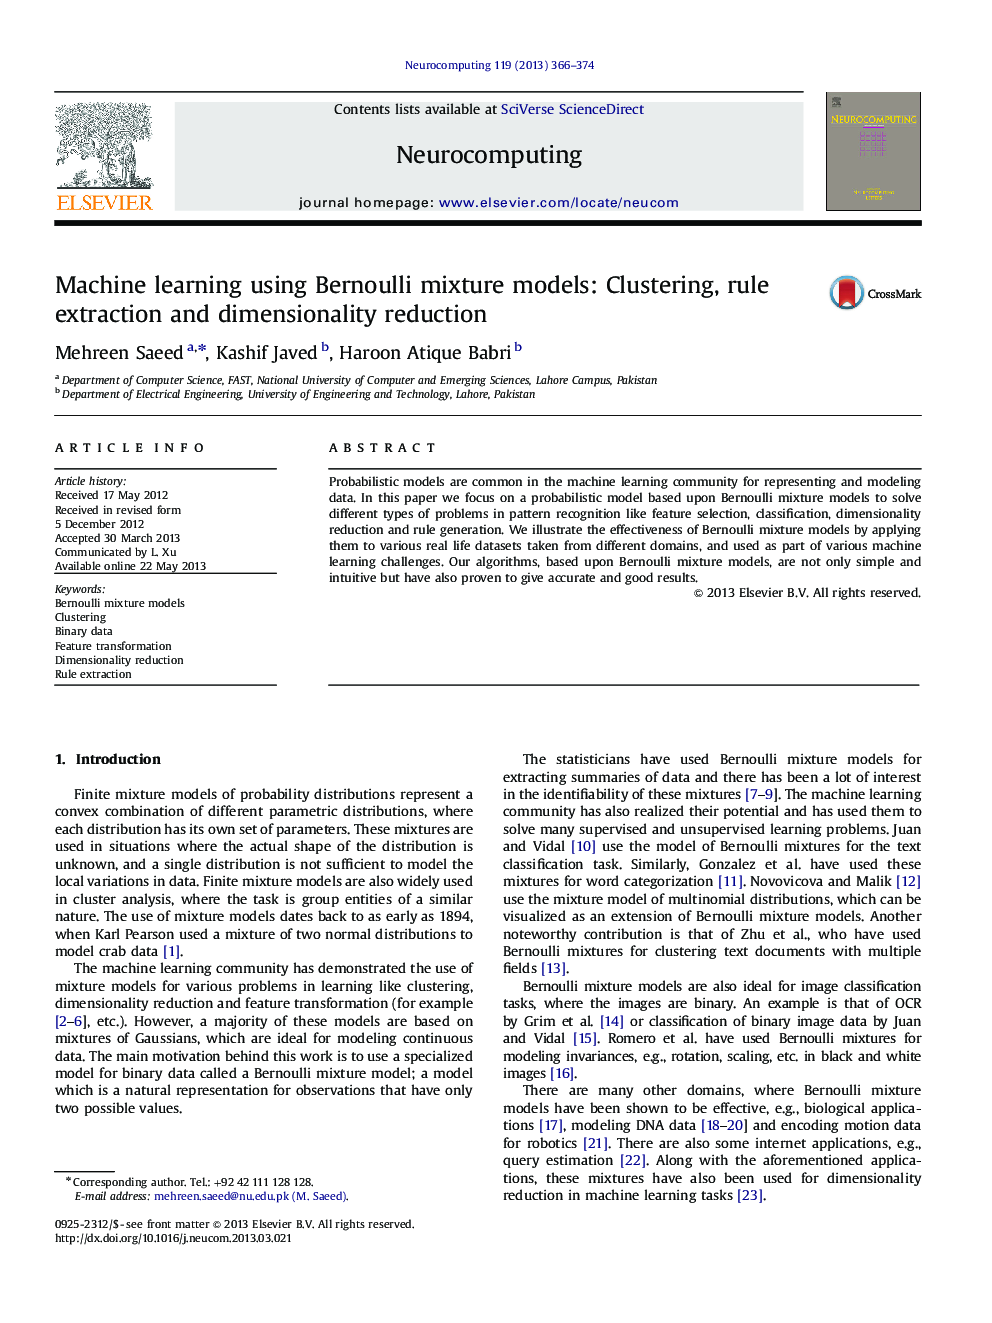 Machine learning using Bernoulli mixture models: Clustering, rule extraction and dimensionality reduction